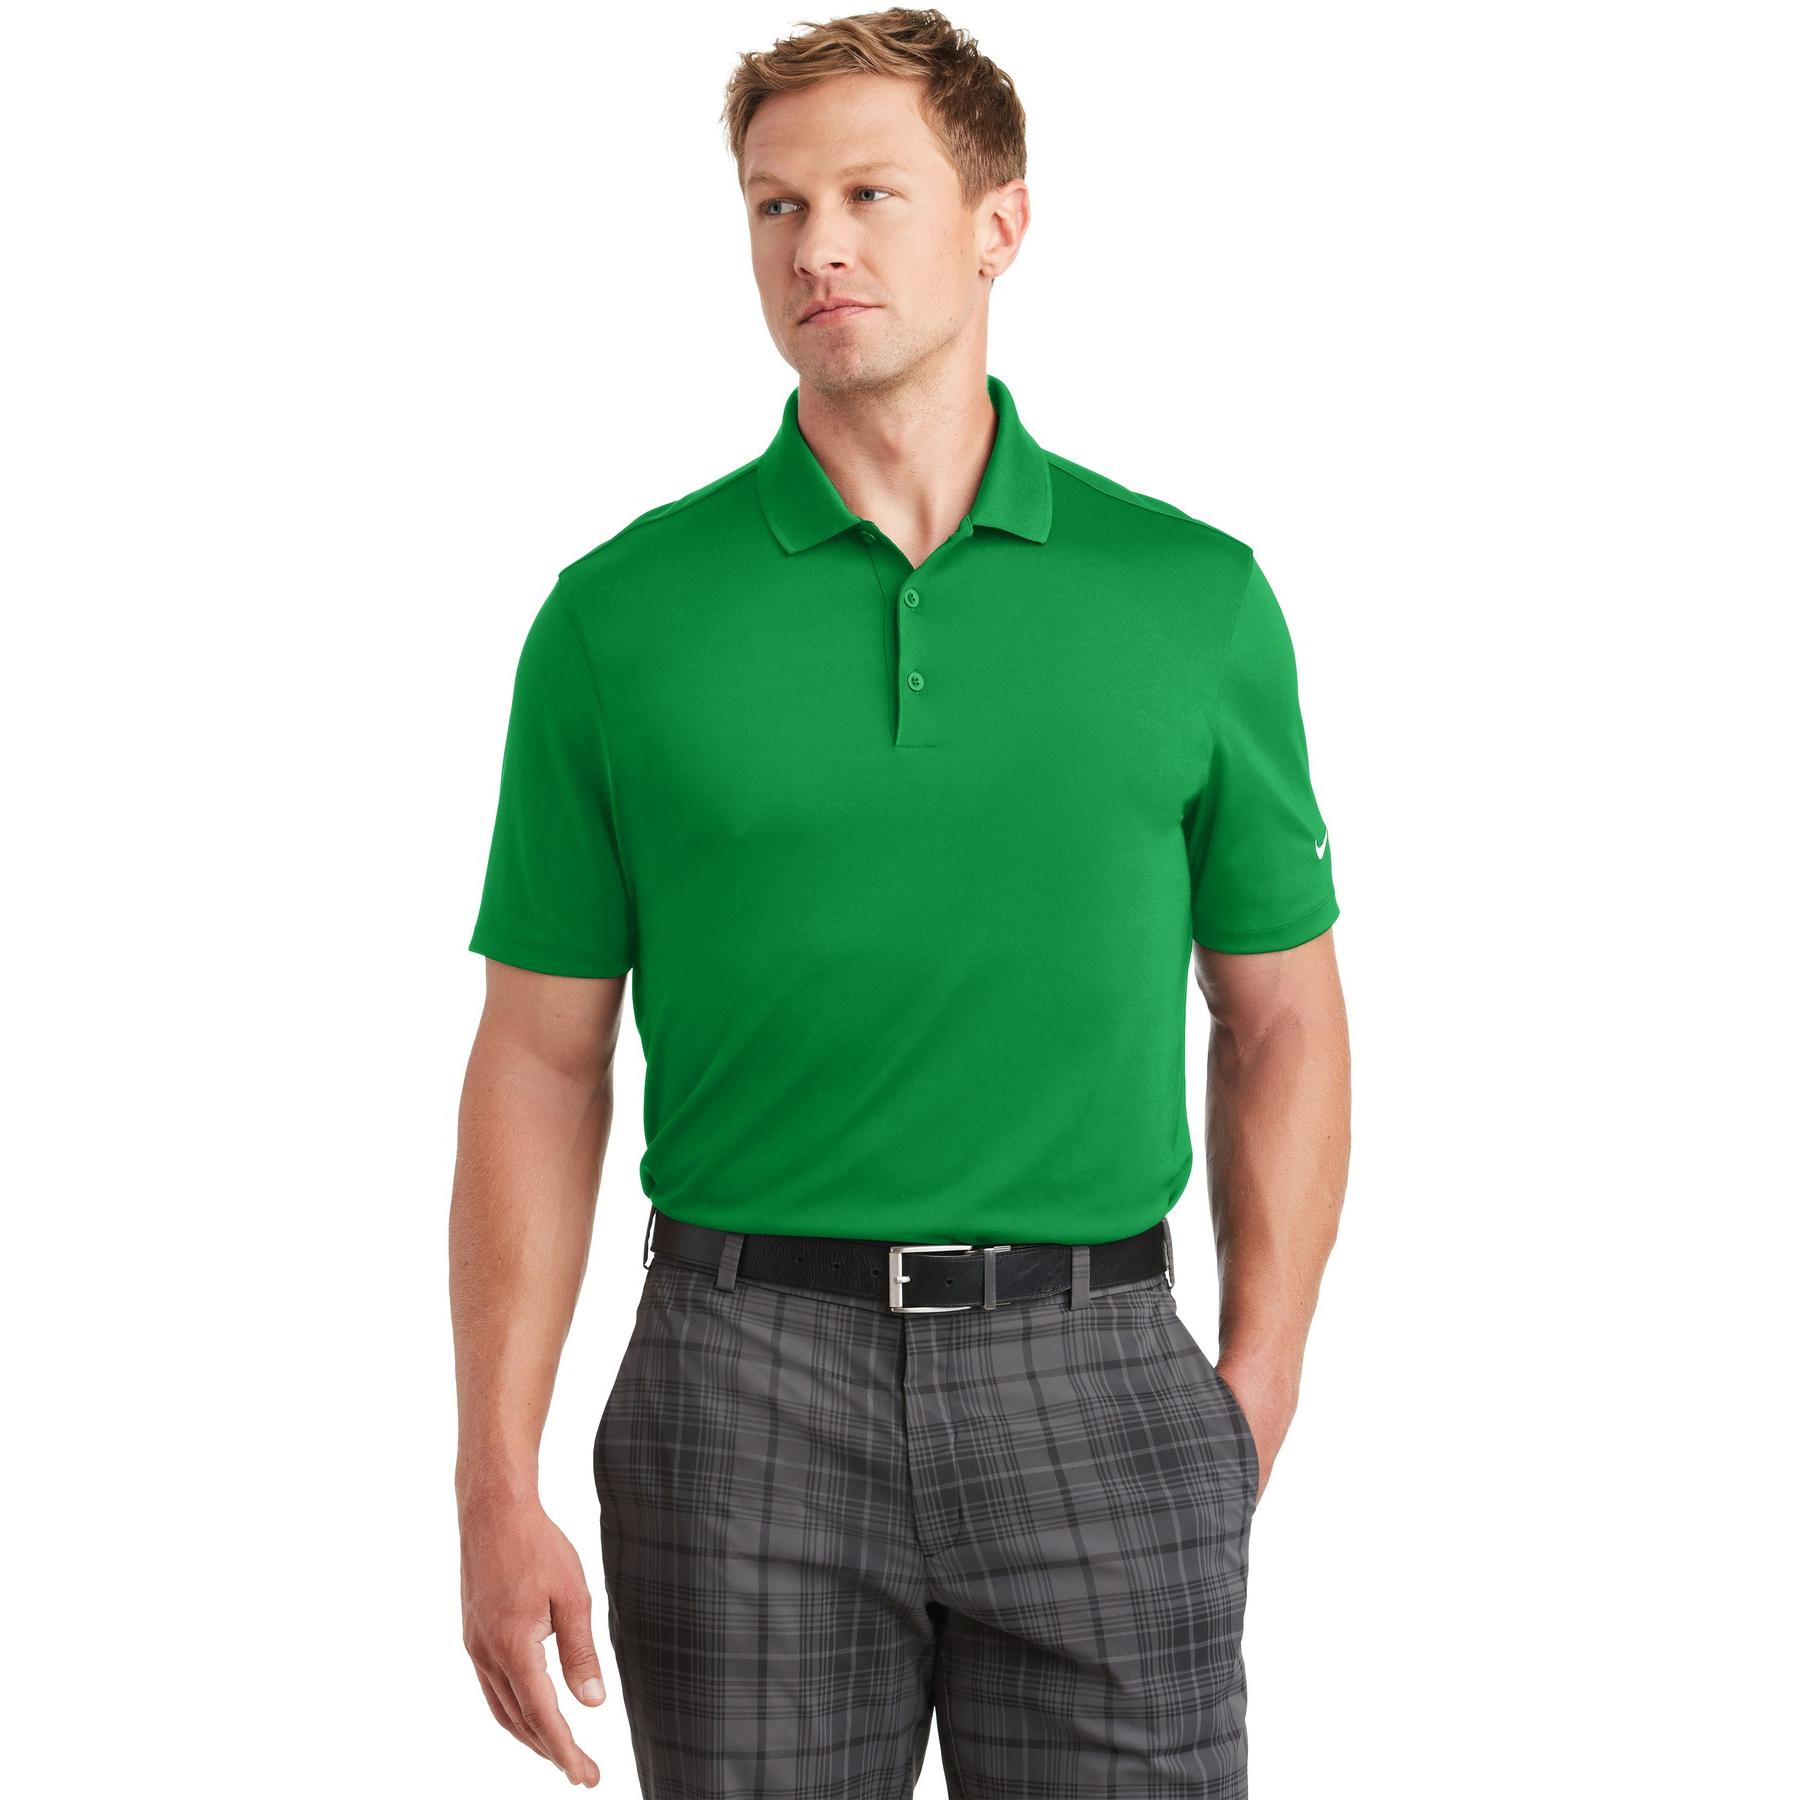 Nike 838956 Dri-FIT Players Polo with Flat Knit Collar - Pine Green ...